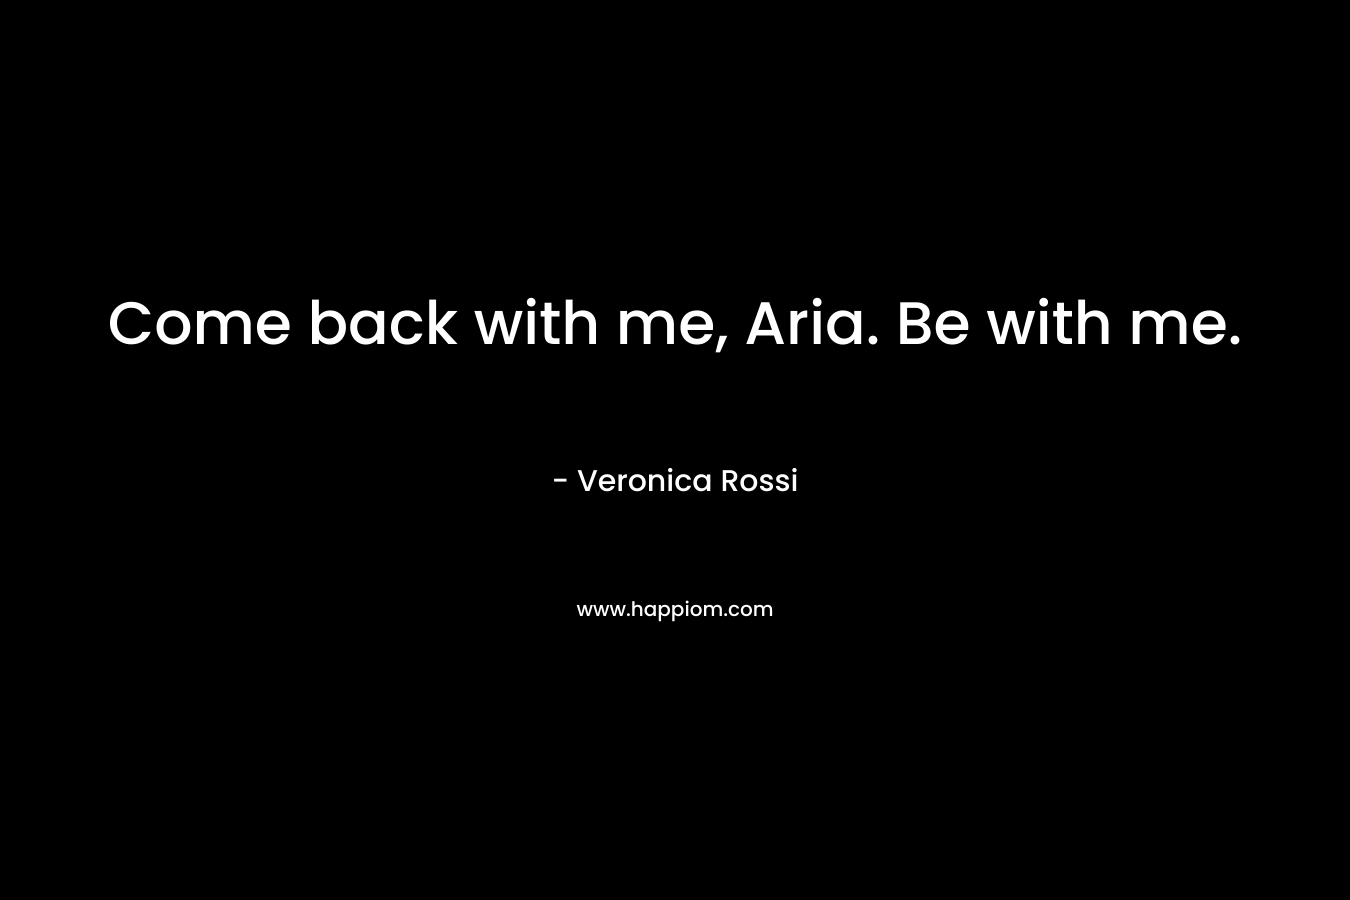 Come back with me, Aria. Be with me. – Veronica Rossi